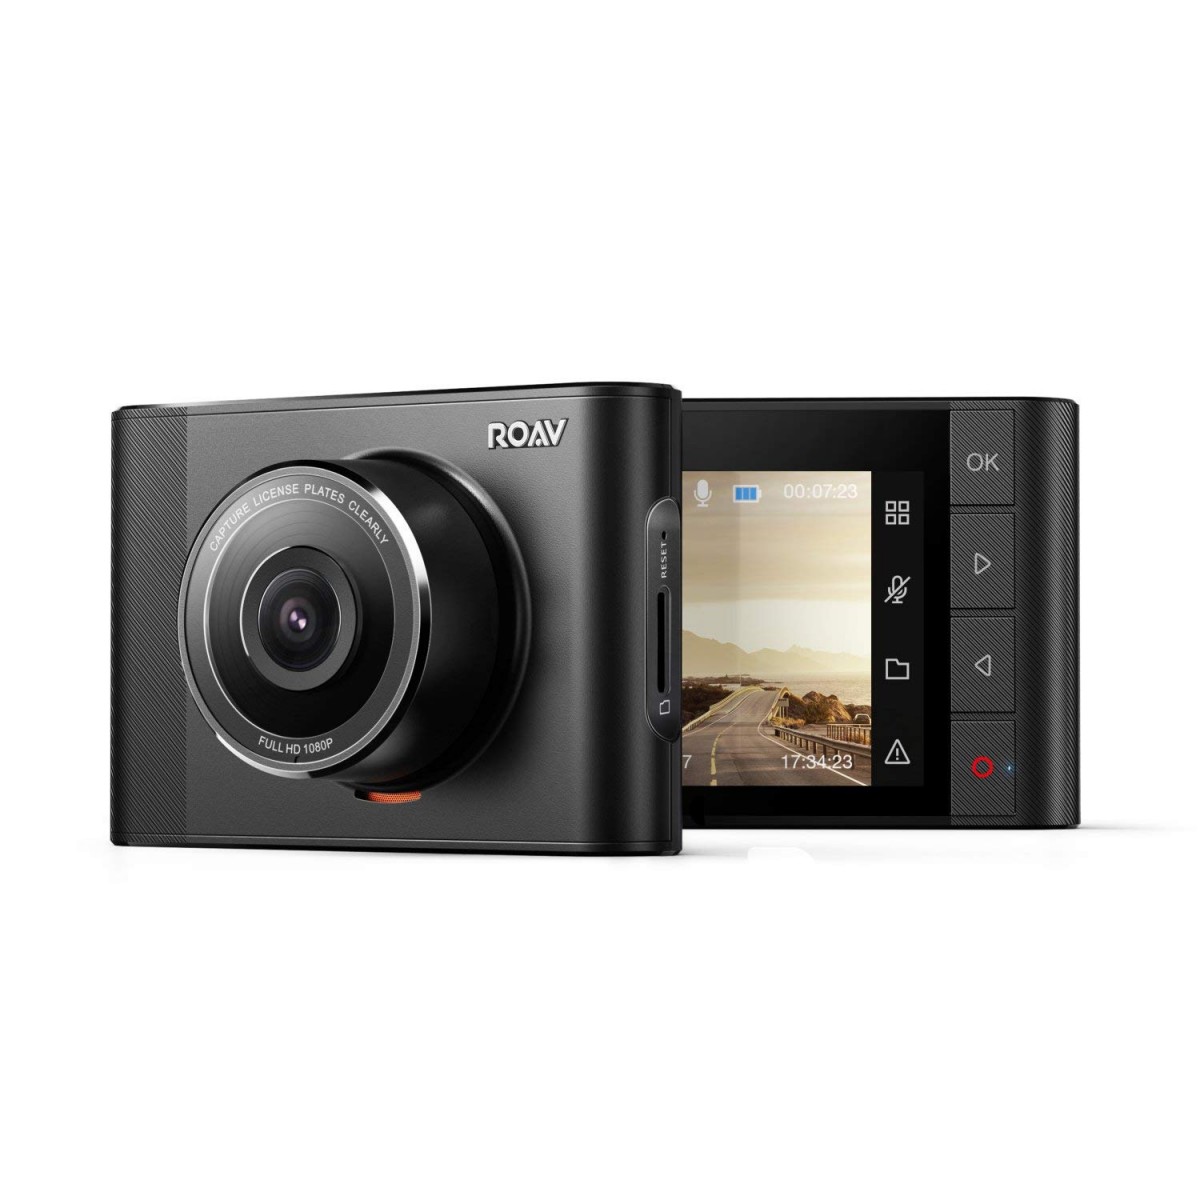 East-West Brothers Garage: Product Review: Anker Roav Dashcam A1